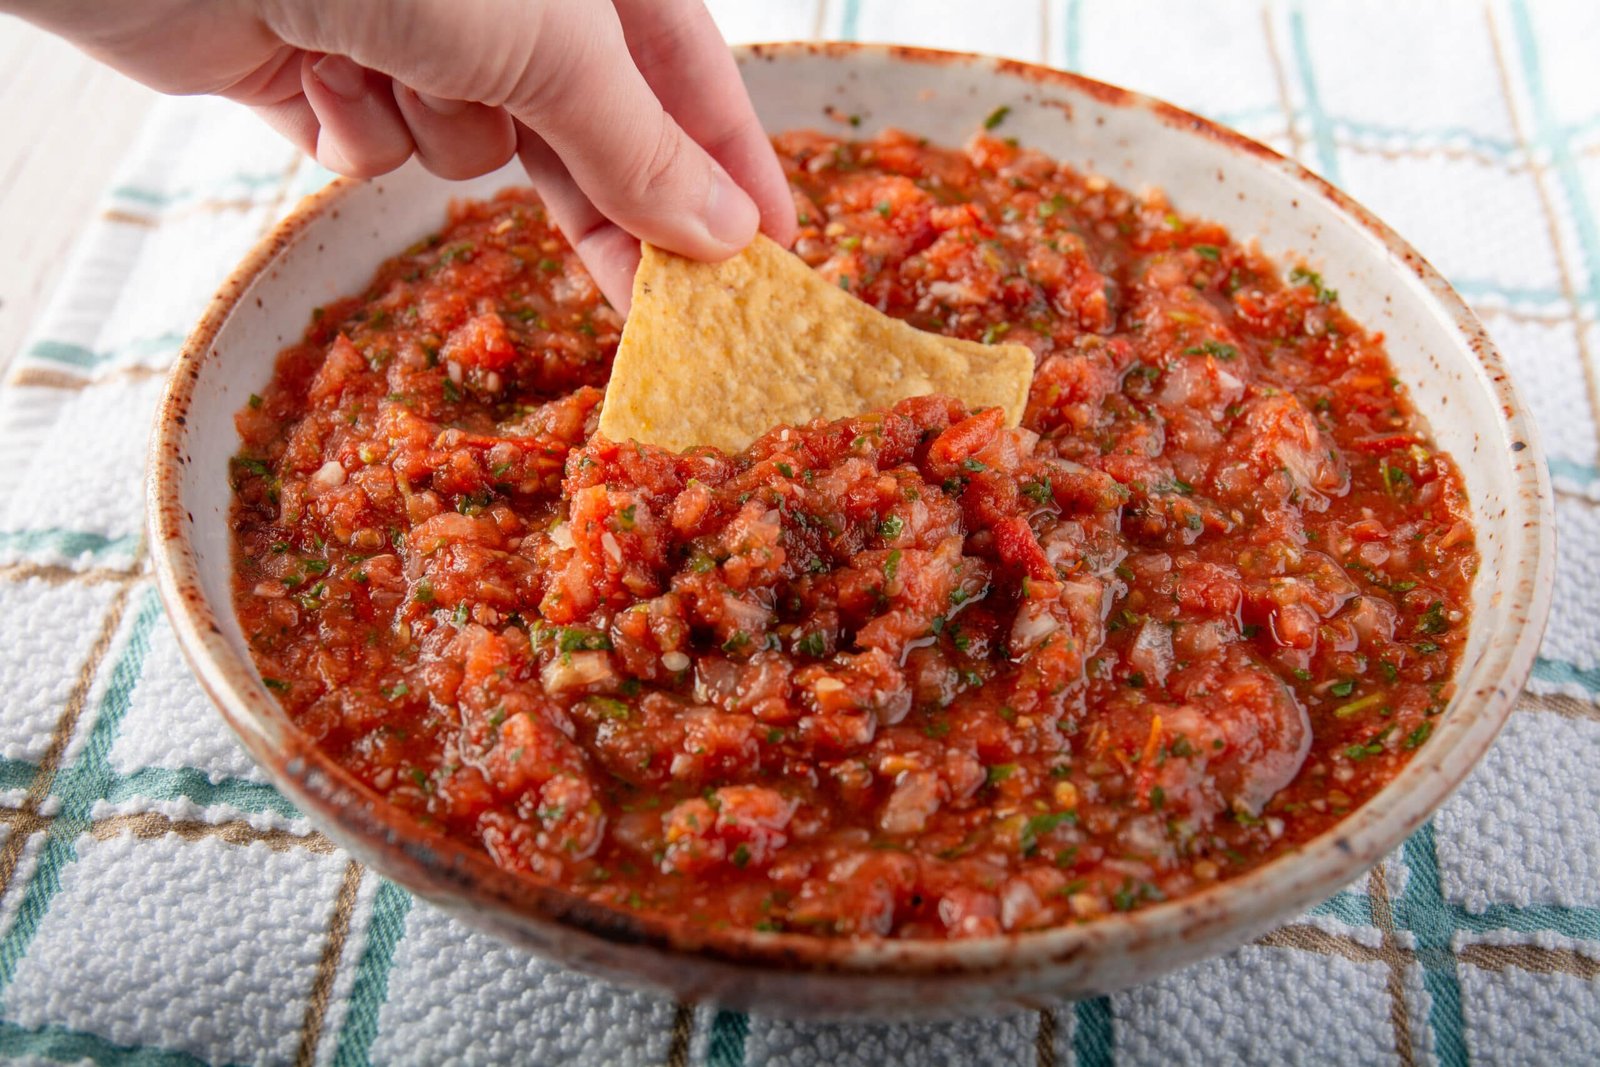 A hand dipping a chip into a bowl of air fryer salsa.